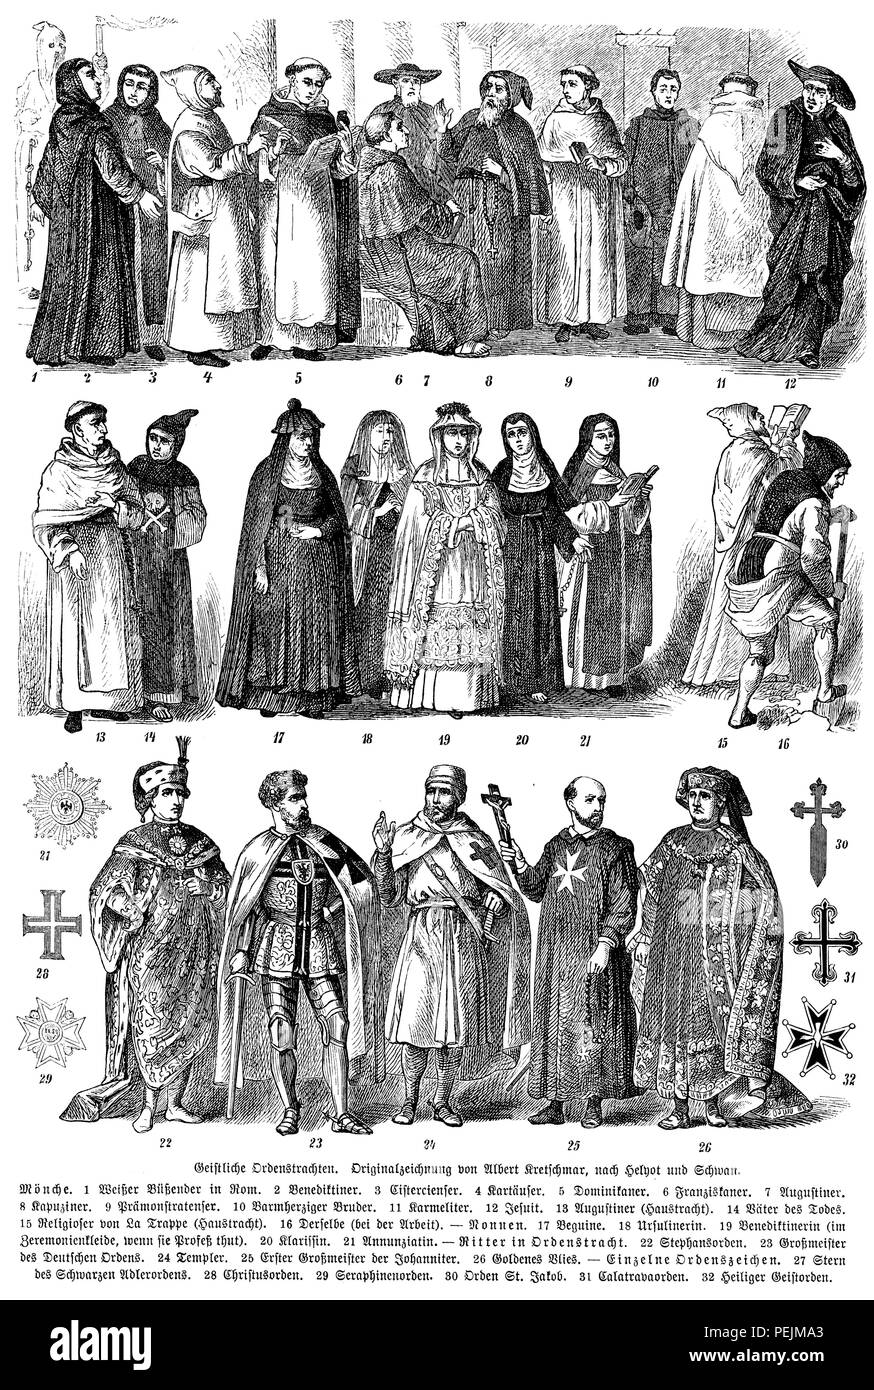 Spiritual orders. Original drawing by Albert Kretschmar, after Helhot and Schwan. Monks. 1 White penitent in Rome. 2 Benedictines. 3 Ecientians. 4 caravans. 5 Dominicans. 6 Franciscans. 7 Augstiners. 8 capuchins. 9 Premonstratensians. 10 Merciful brother. 11 Carmelites. 12 Jusuit. 13 Augustinian (house). 14 fathers of death. 15 Religious of La Trappe (House). 16 The same (at work) - nuns. 17 Beguine. 18 Ursuline. 19 Benedictine (in ceremonial dress, if she does profession). 20 Clarissin. 21 Annunziatin knights in medal dress. 22 St. Stephen's orders. 23 Grand Master of the Teutonic Order. 24 t Stock Photo